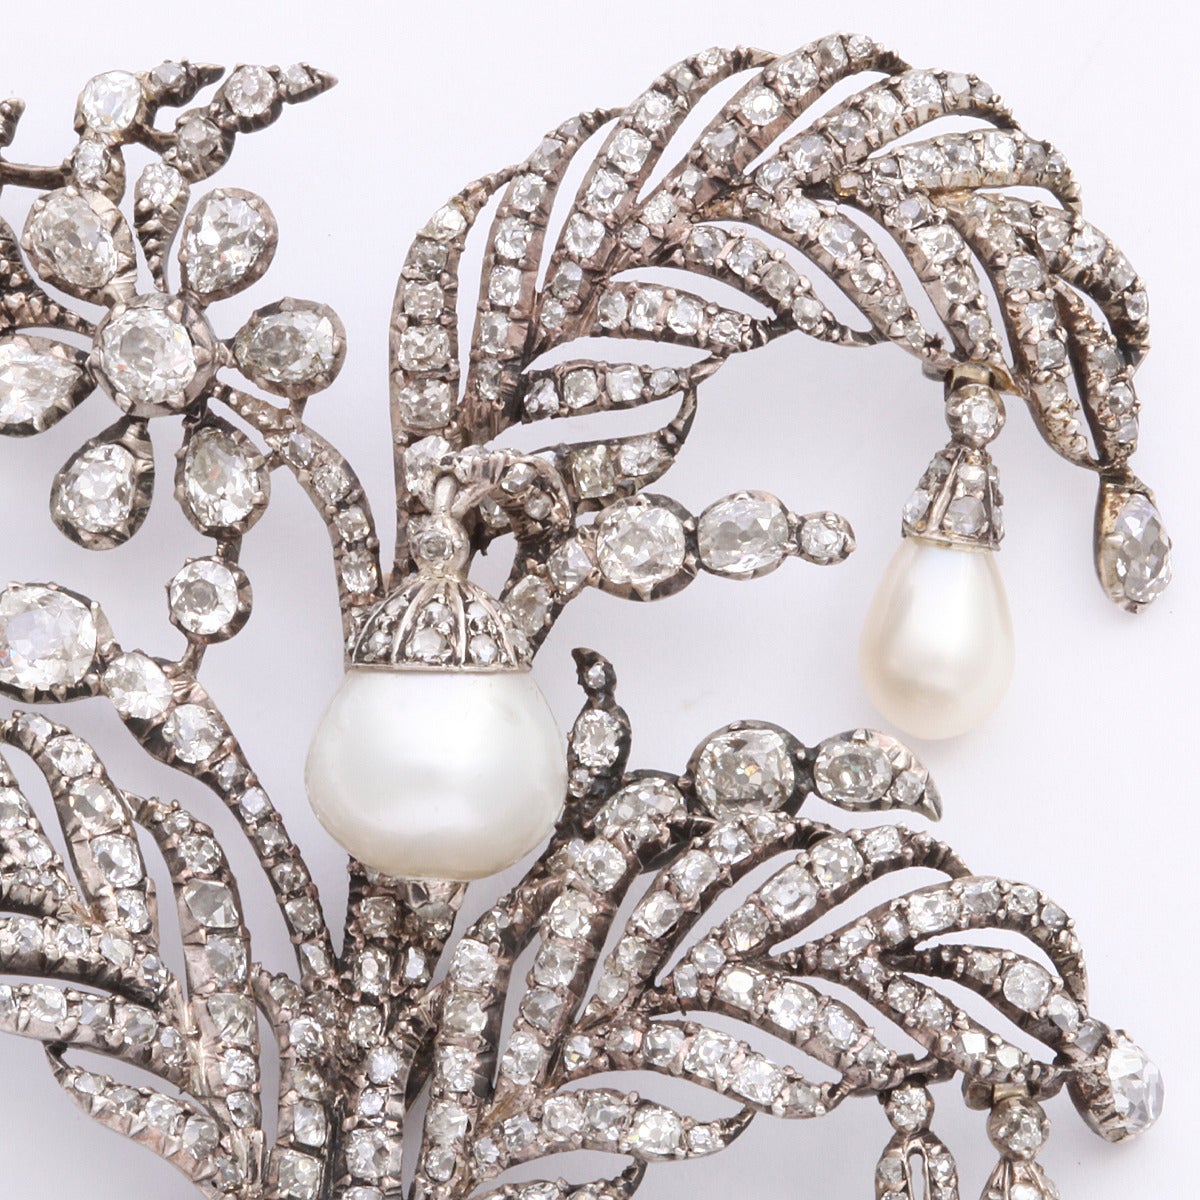 Late eighteenth century natural pearl and diamond spray brooch, with four drop pearls and diamond swags, mounted in silver. Probably from the Russian Crown Jewels.

Length: 3 1/4 inches
(Approx. 11.5 cts.)